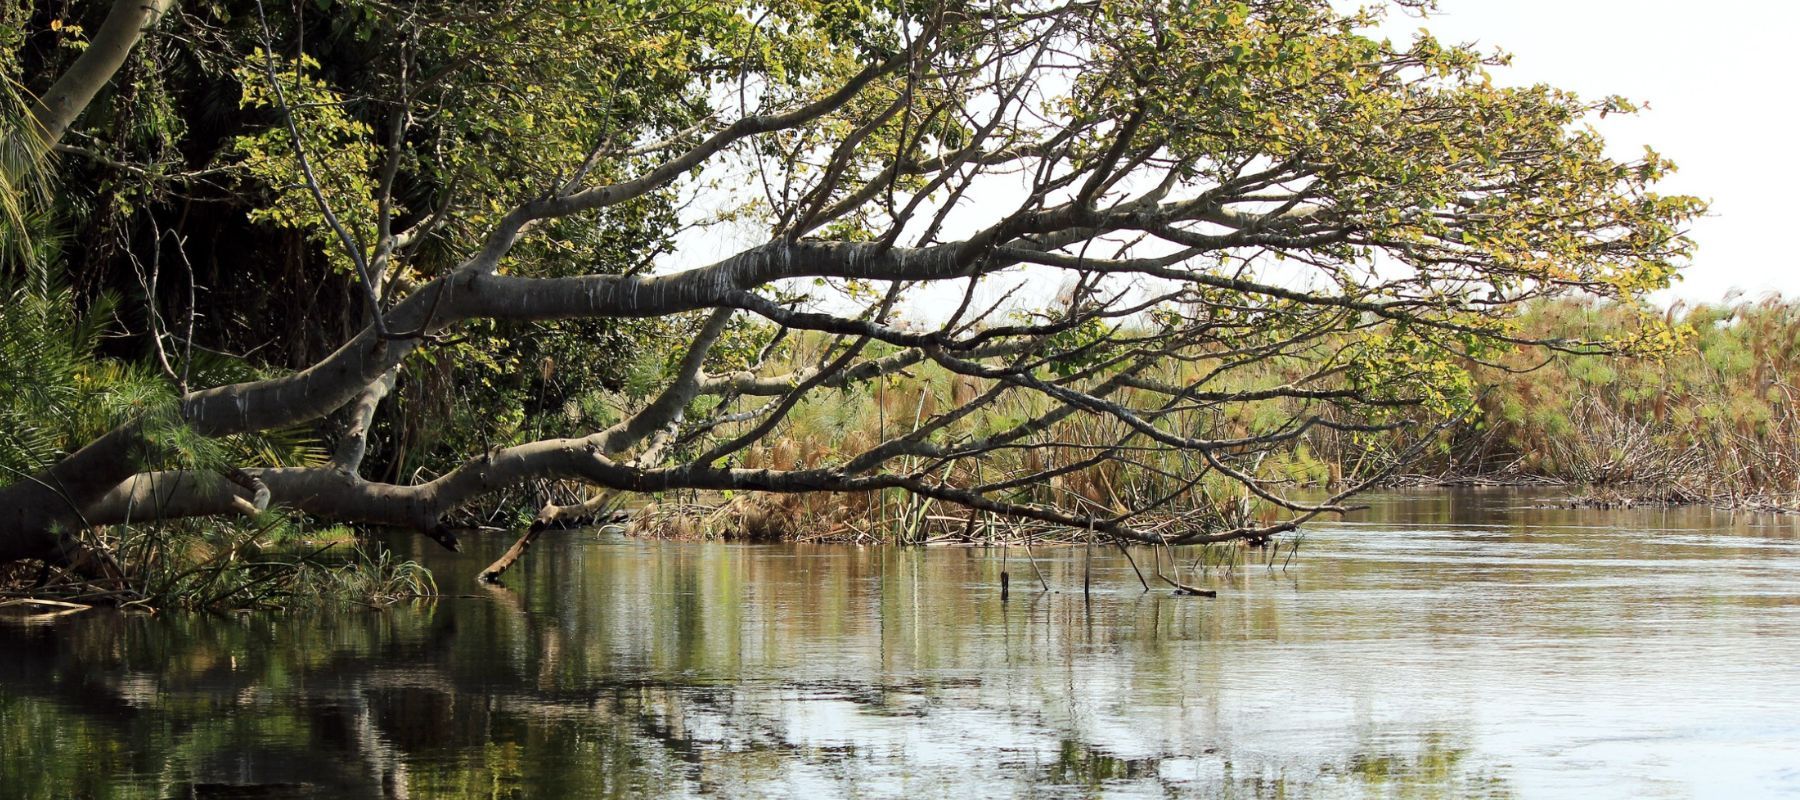 river with large tree hanging over the water in driftwood, texas